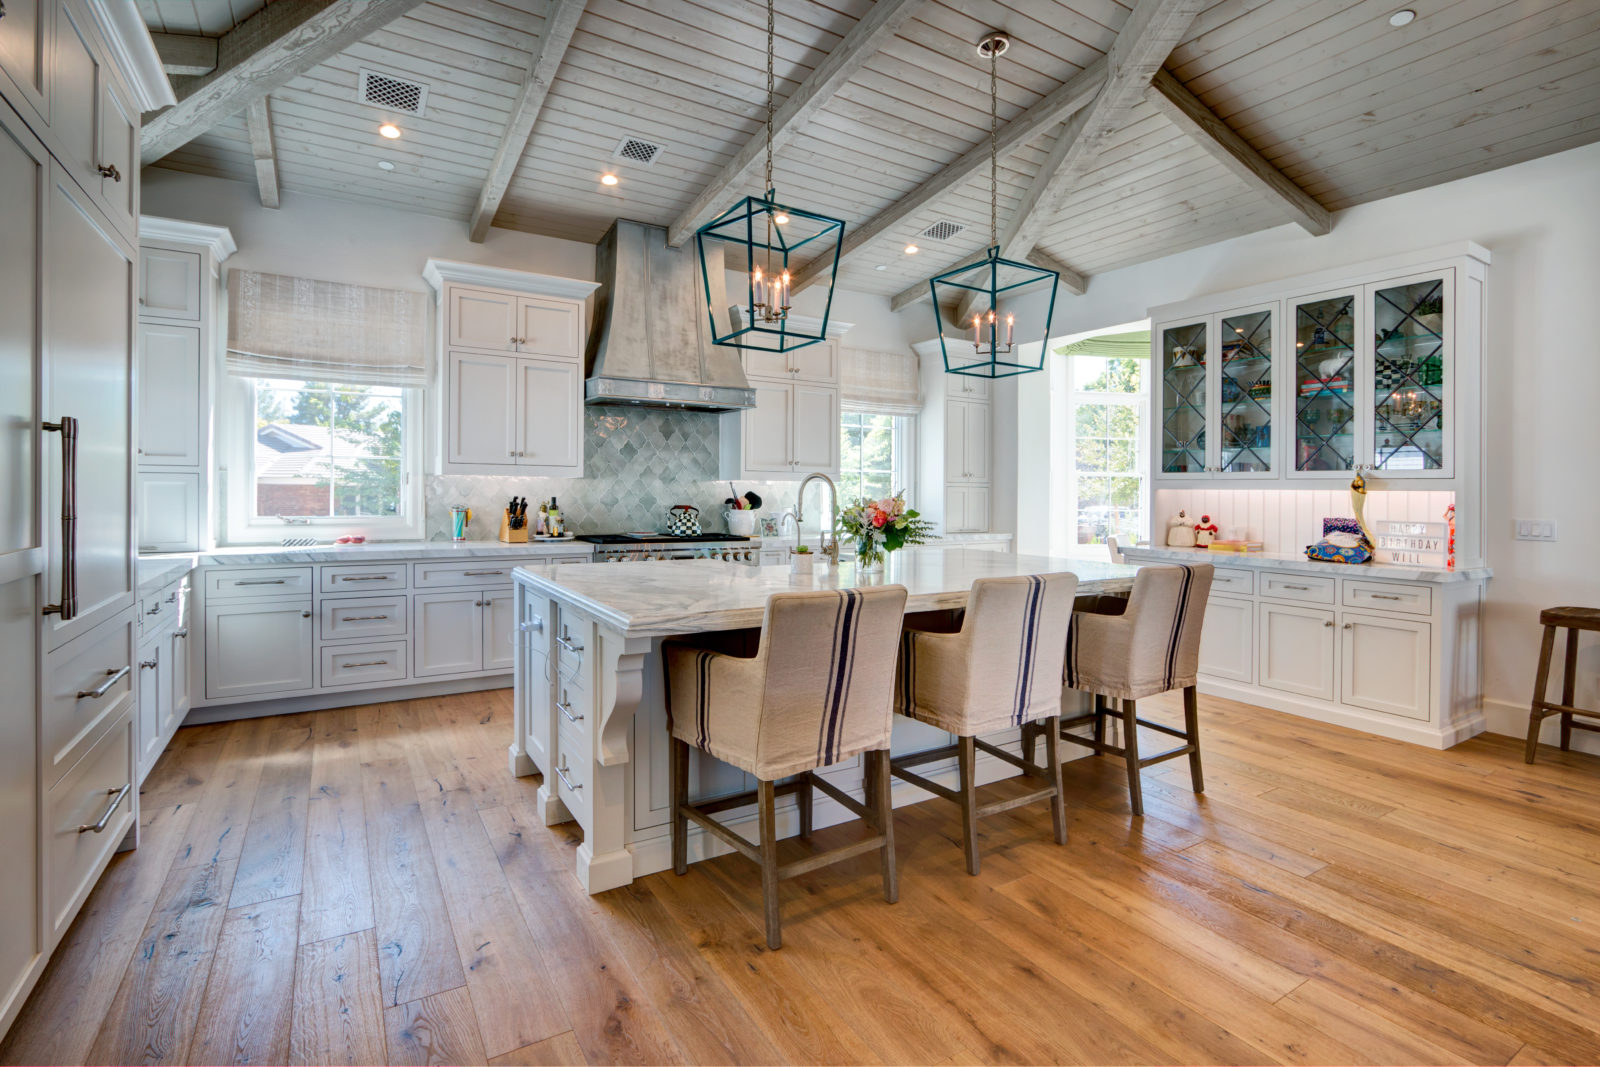 Why Should You Build an Open Kitchen in Your Home?